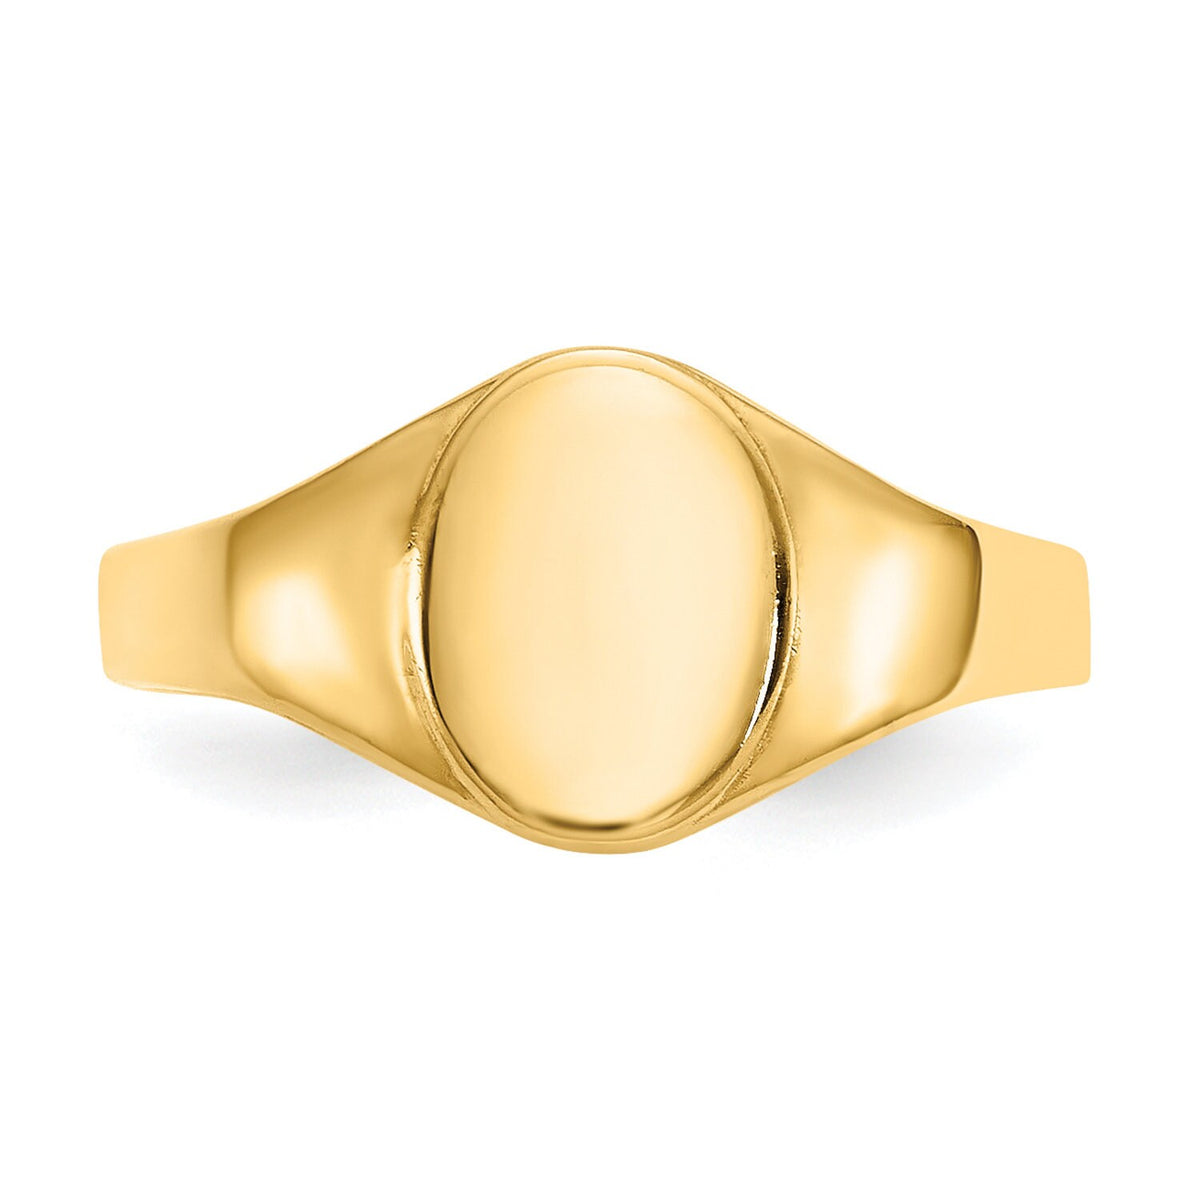 Children's 14k Yellow Gold Engravable Oval Baby Signet Ring ( 1 Character ) SIZE 1-3 Gift Box Included